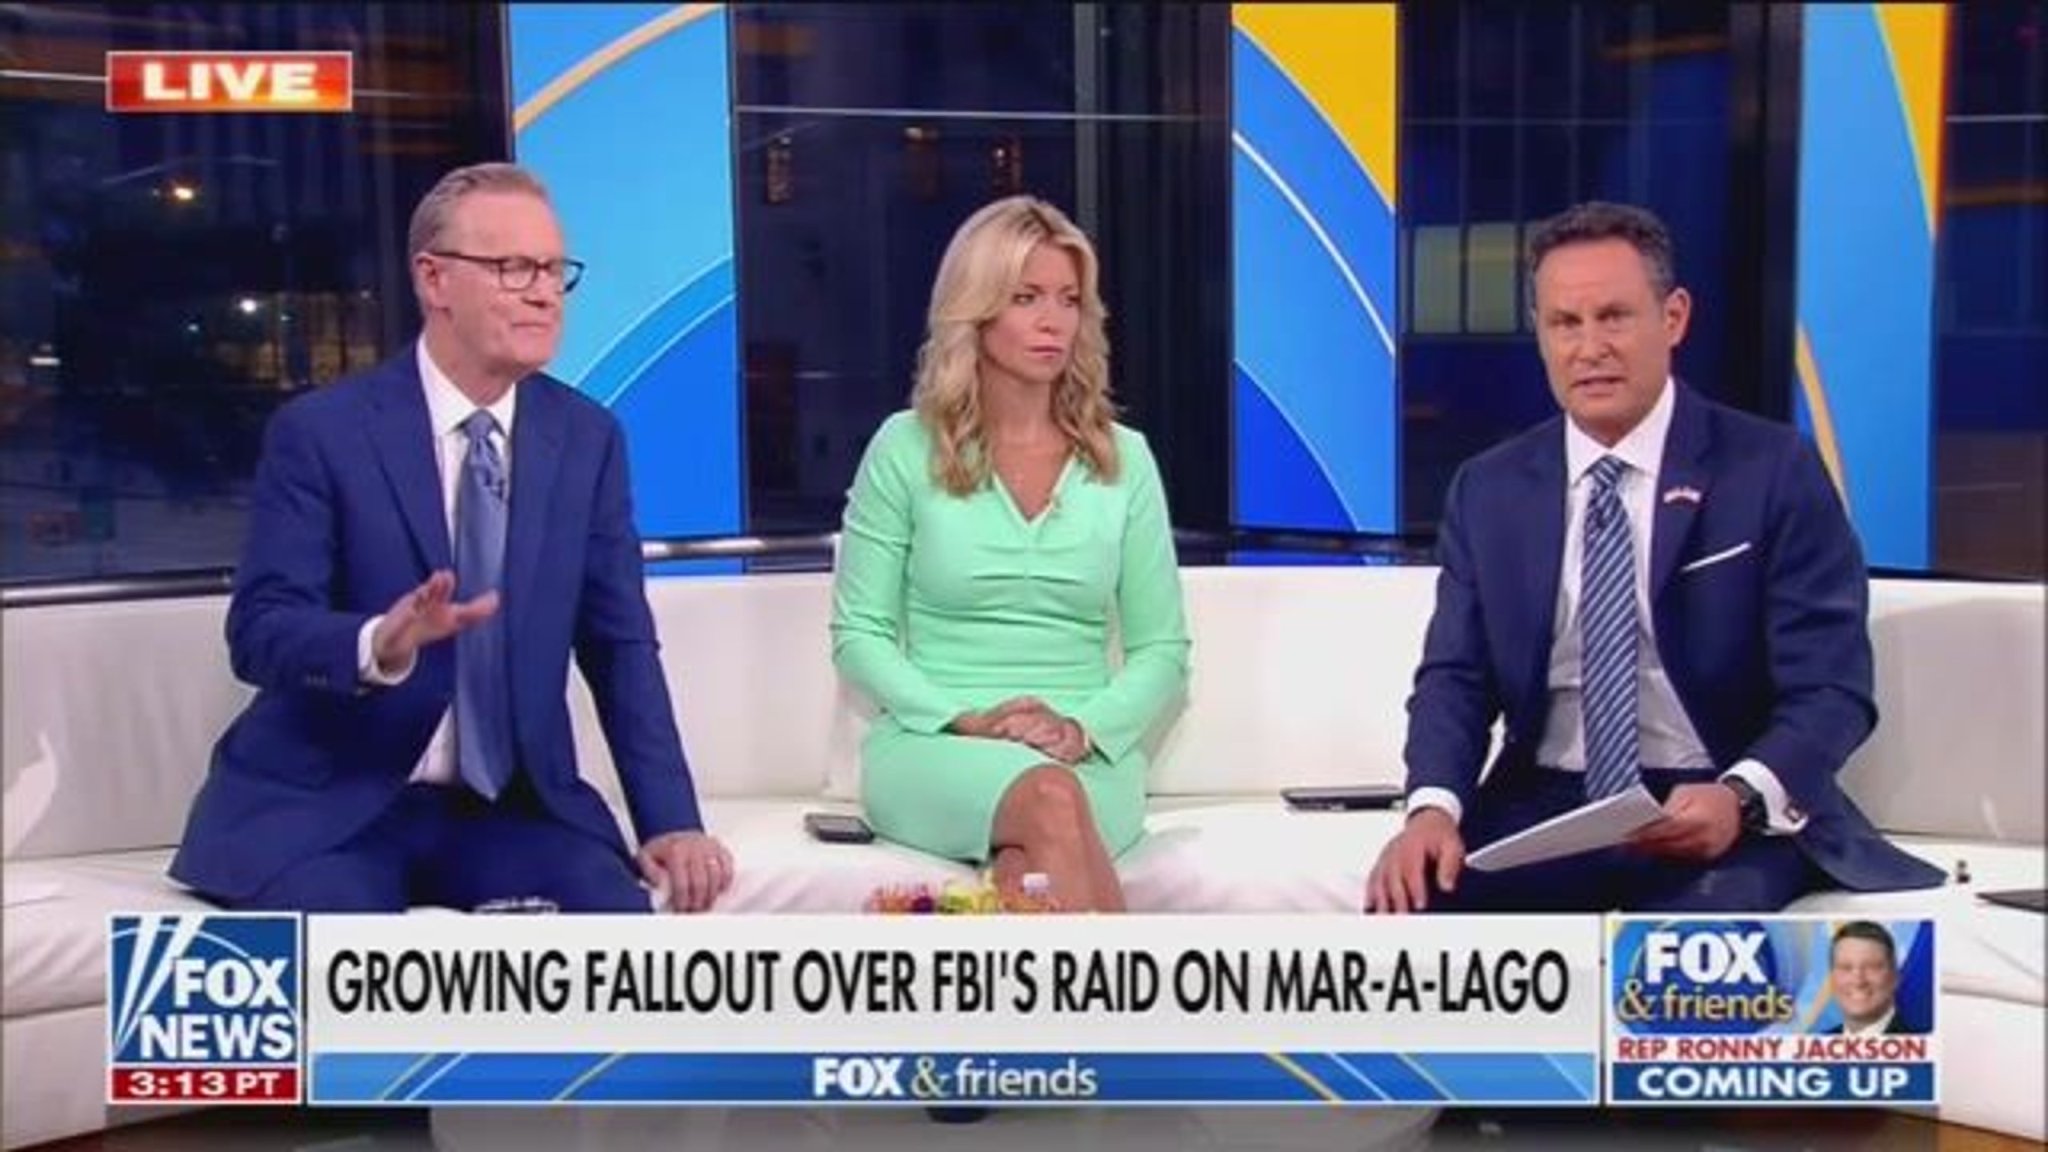 Fox News’ Steve Doocy is back at it again calling out Republicans for their attacks on law enforcement.